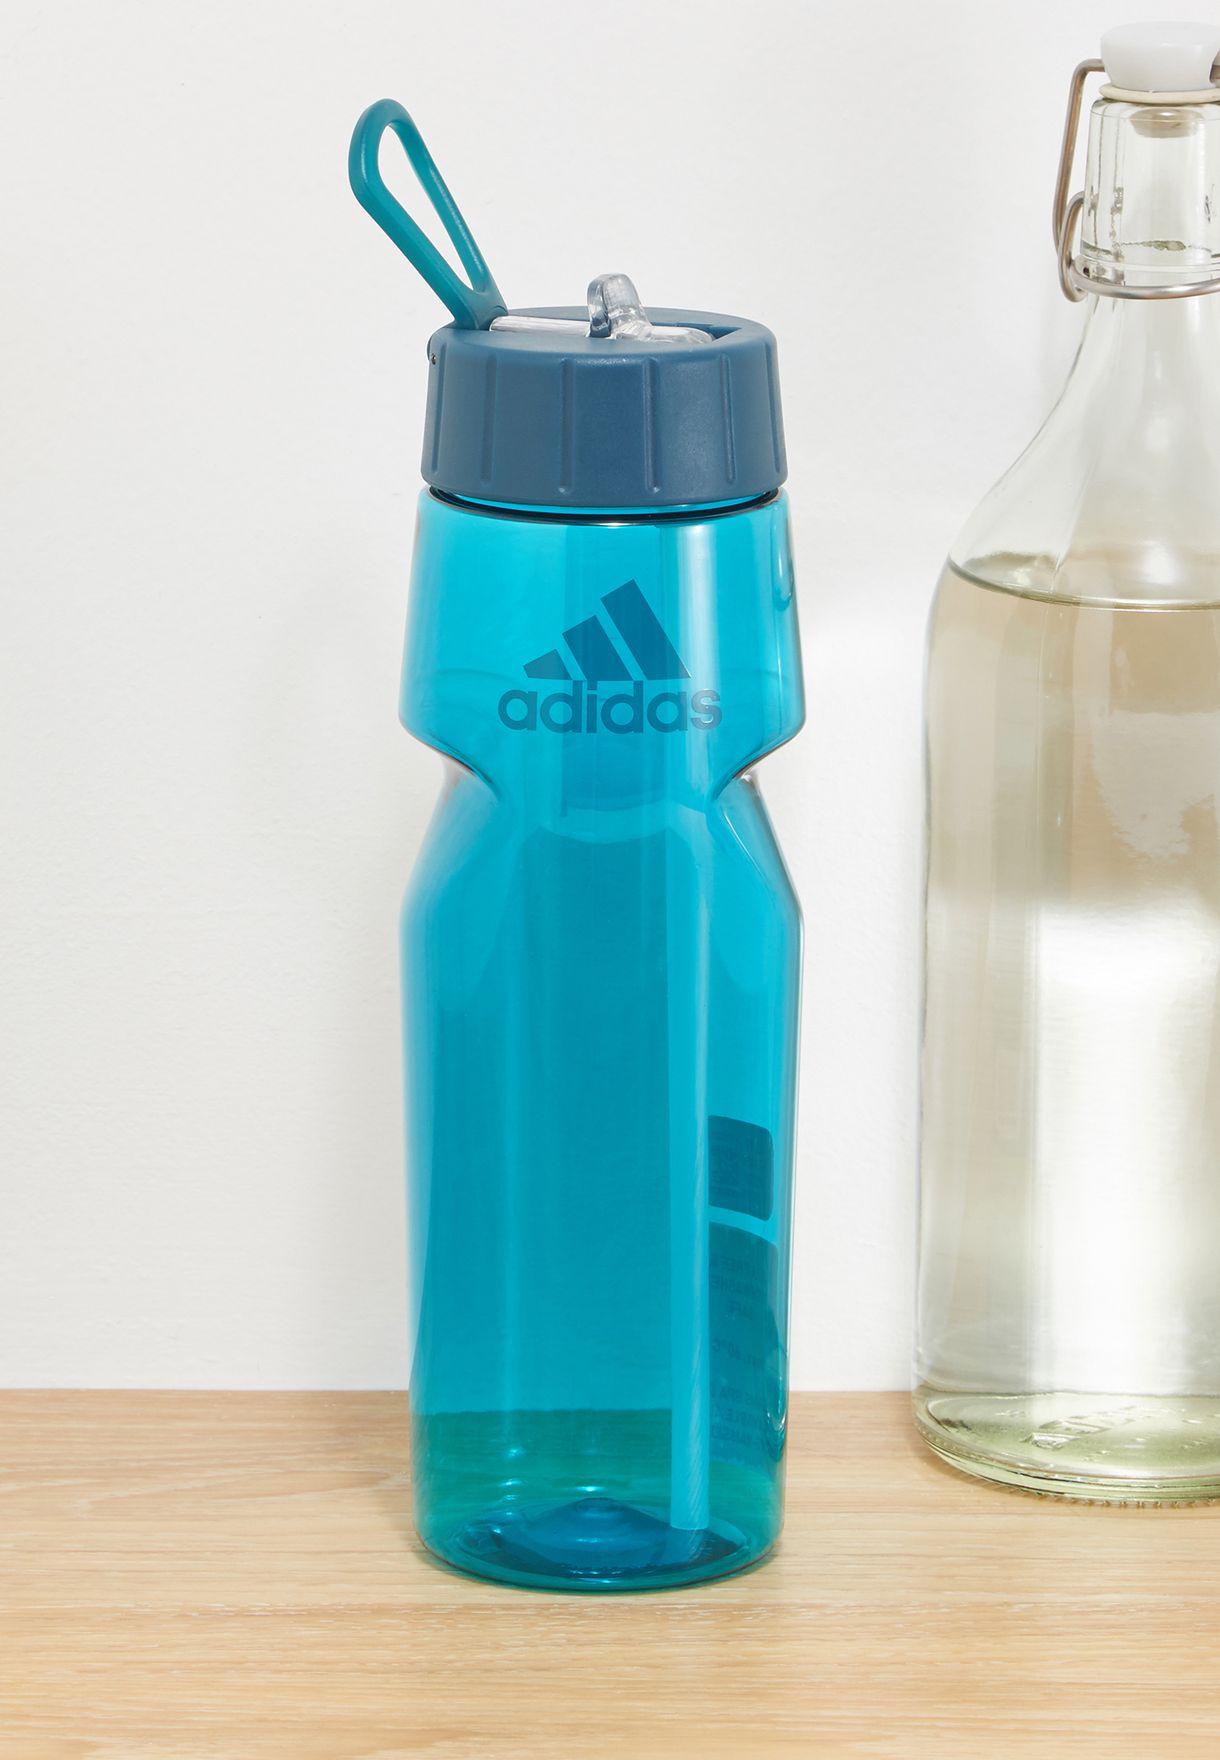 adidas water bottle with straw